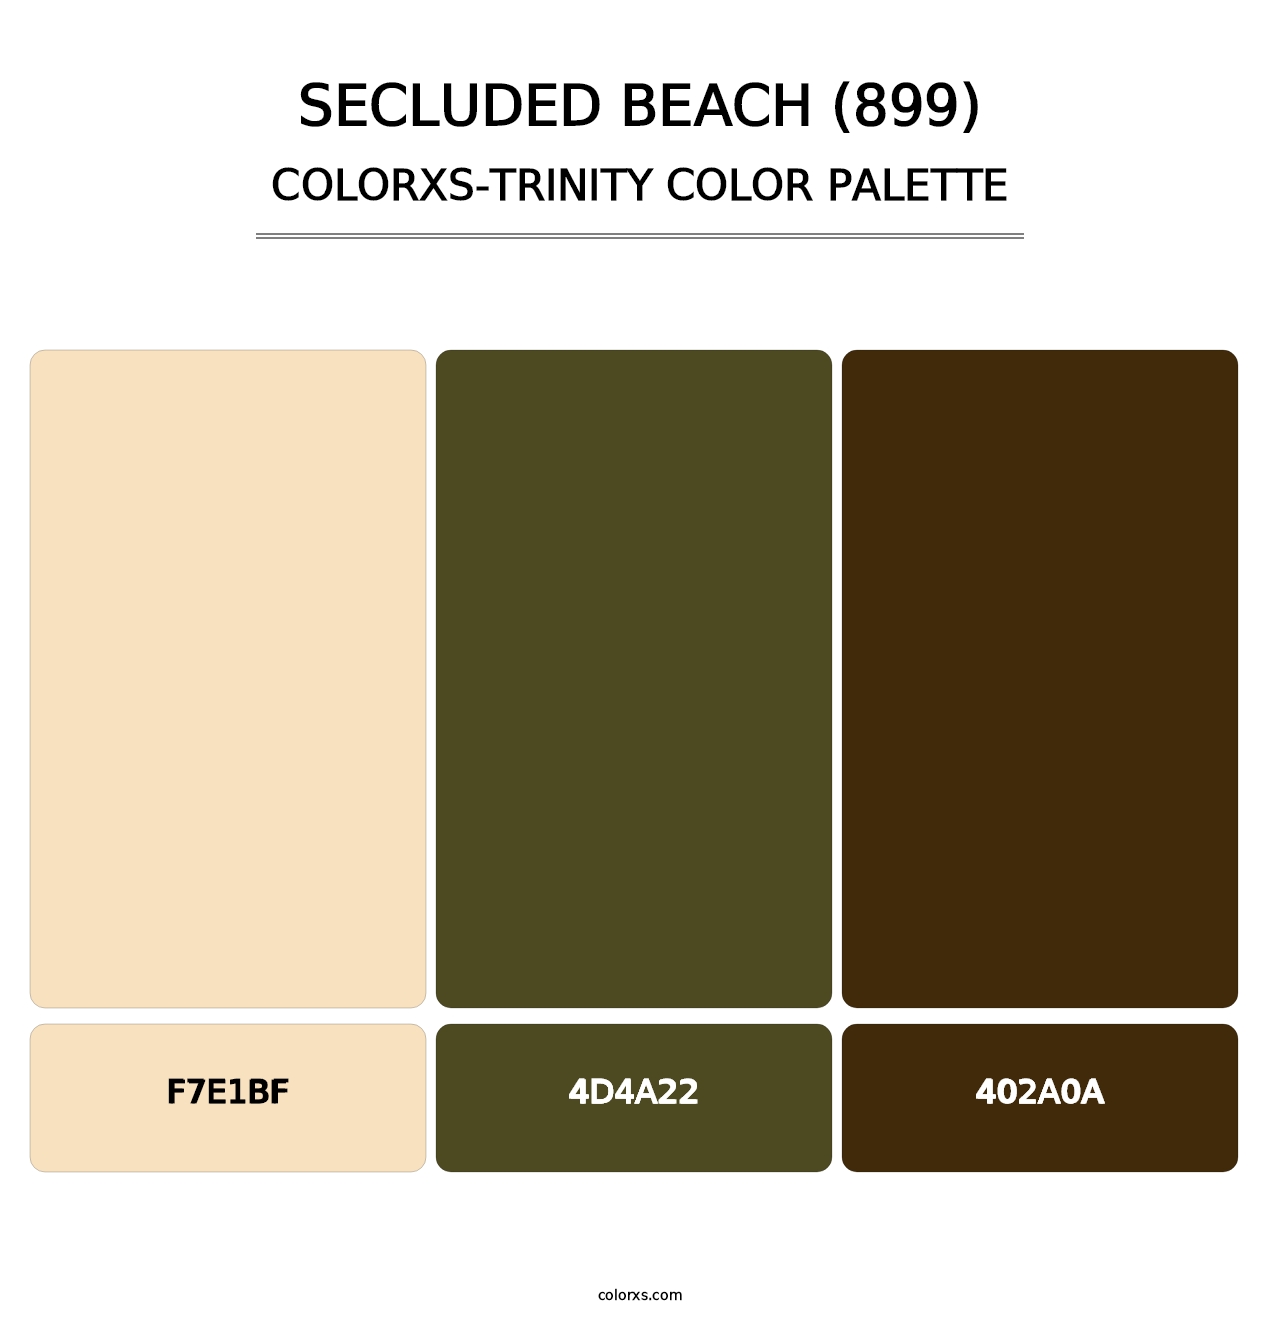 Secluded Beach (899) - Colorxs Trinity Palette